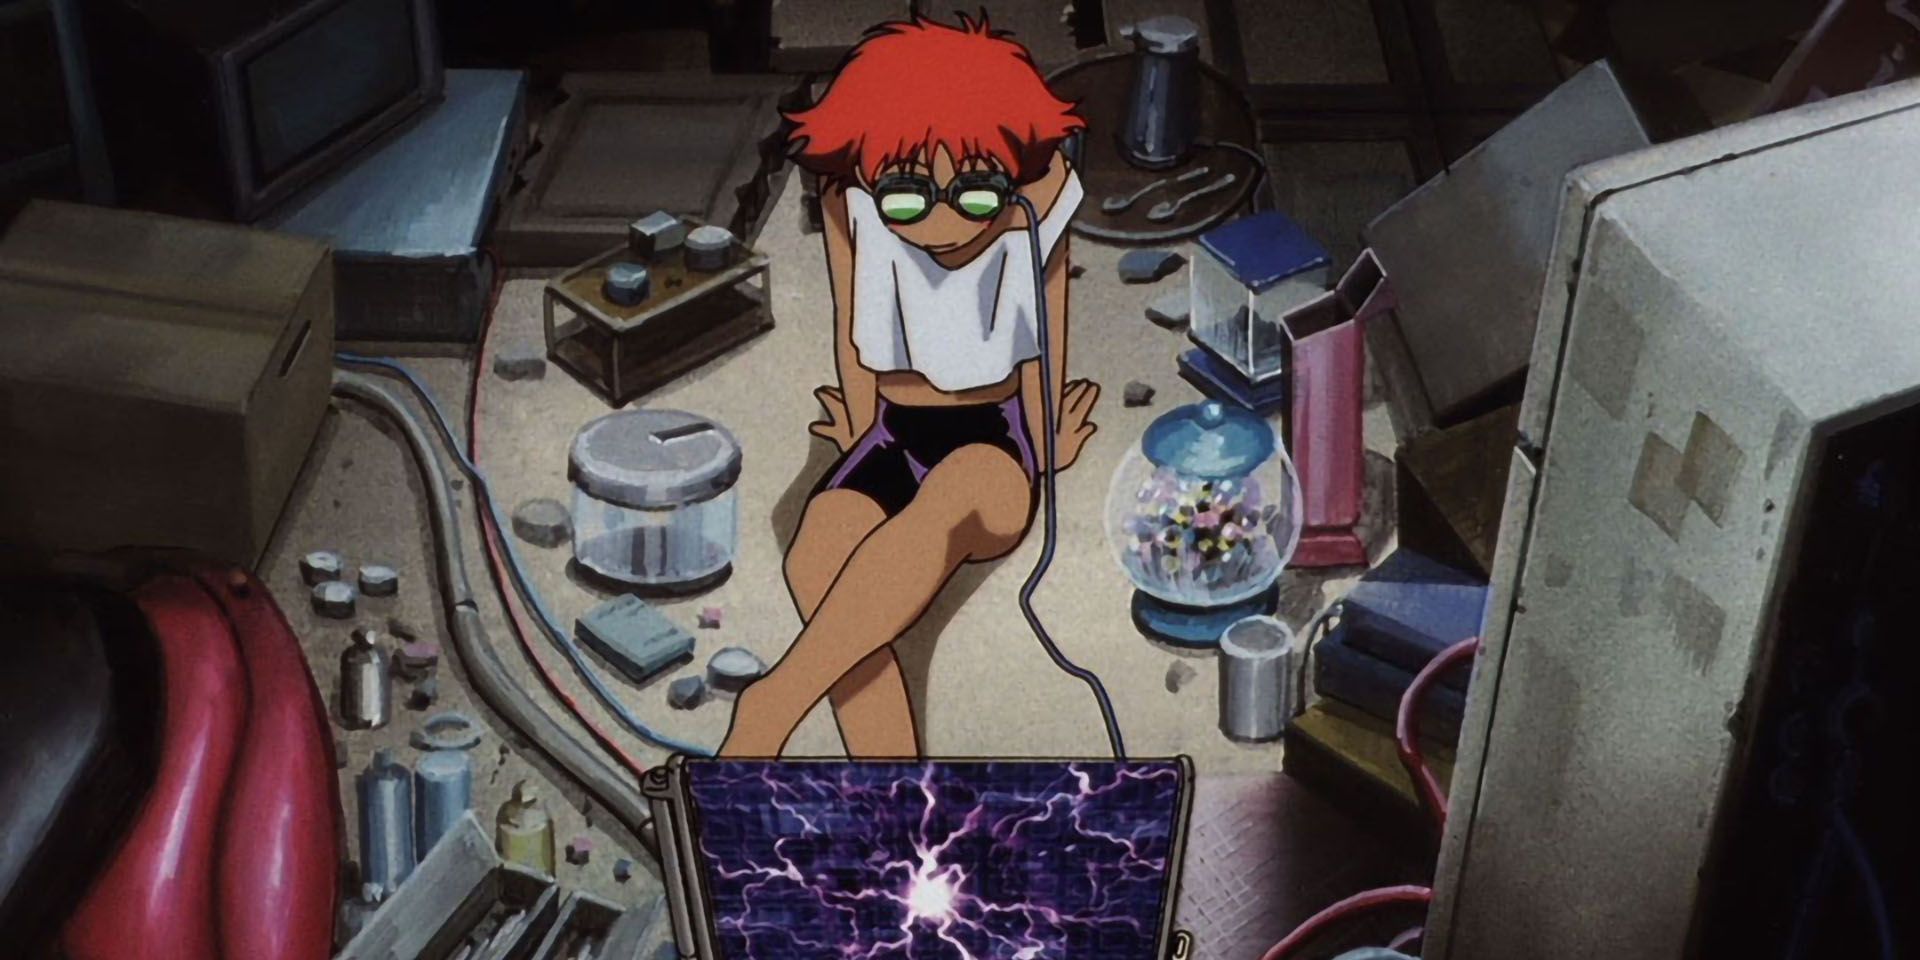 Ed-from-Cowboy-Bebop-amidst-her-mess.jpg